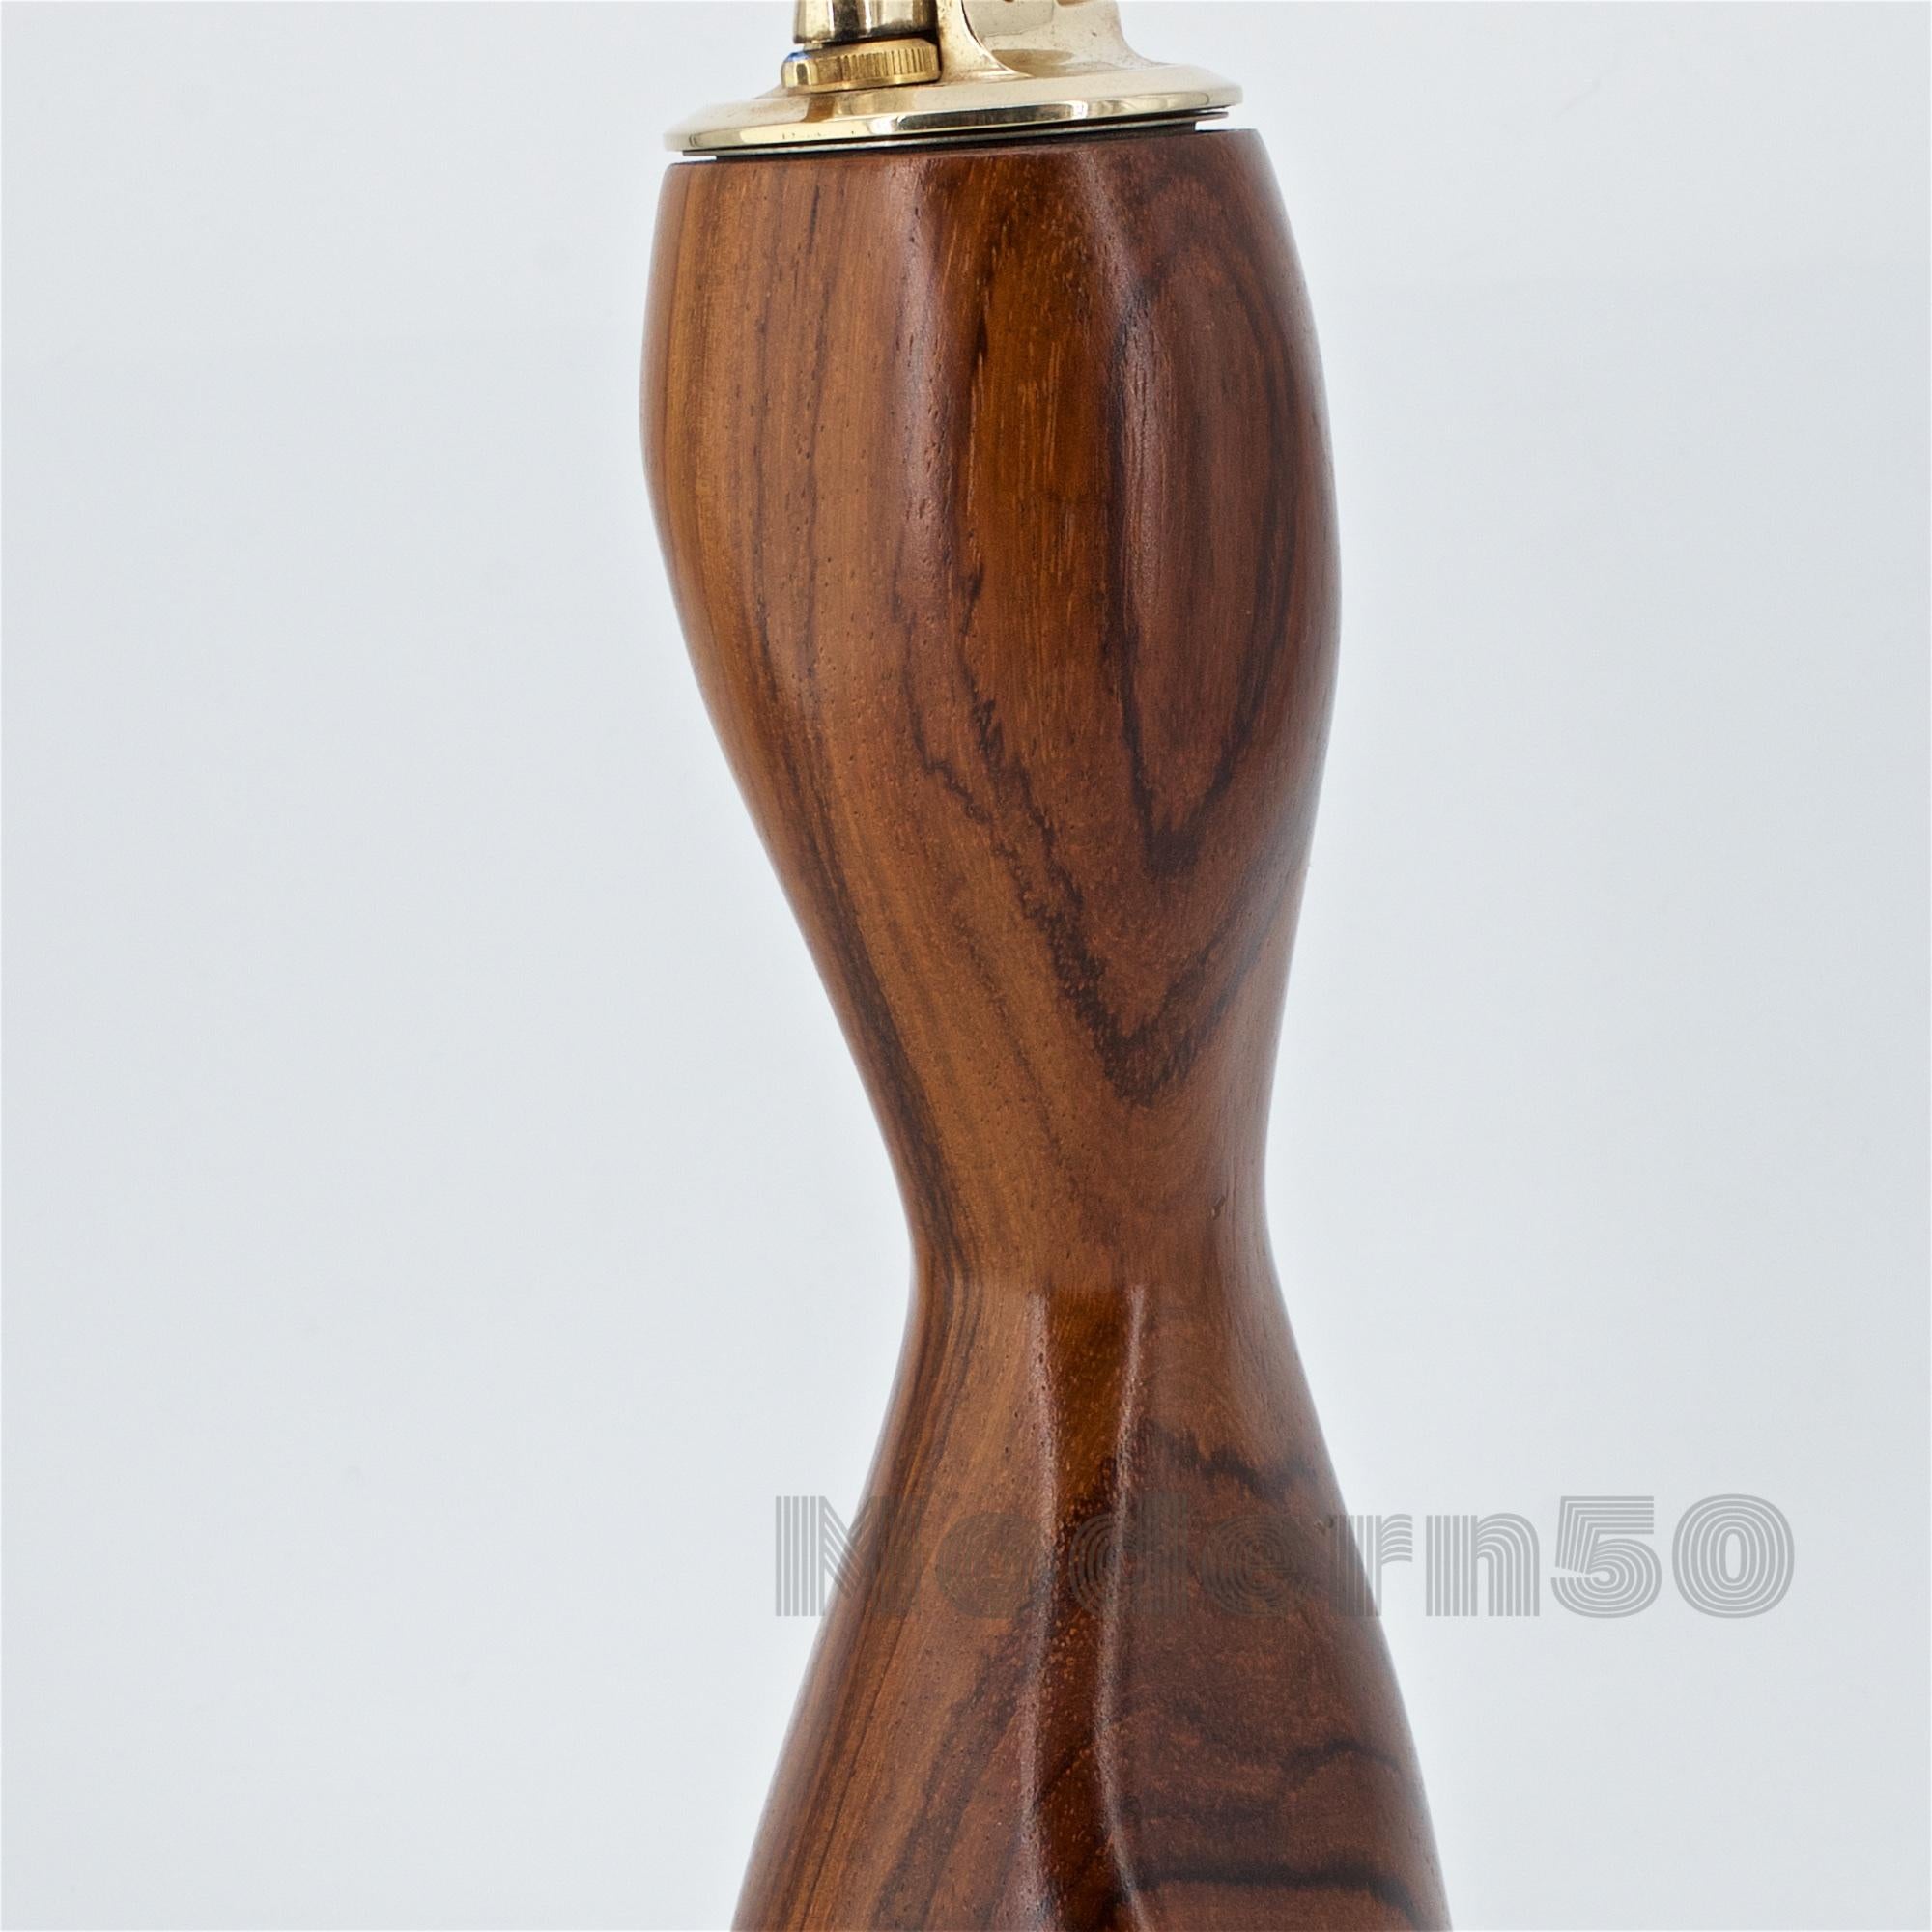 1960s Emil Milan Rosewood Brass Table Lighter Sculpture American Studio Craft In Fair Condition For Sale In Hyattsville, MD